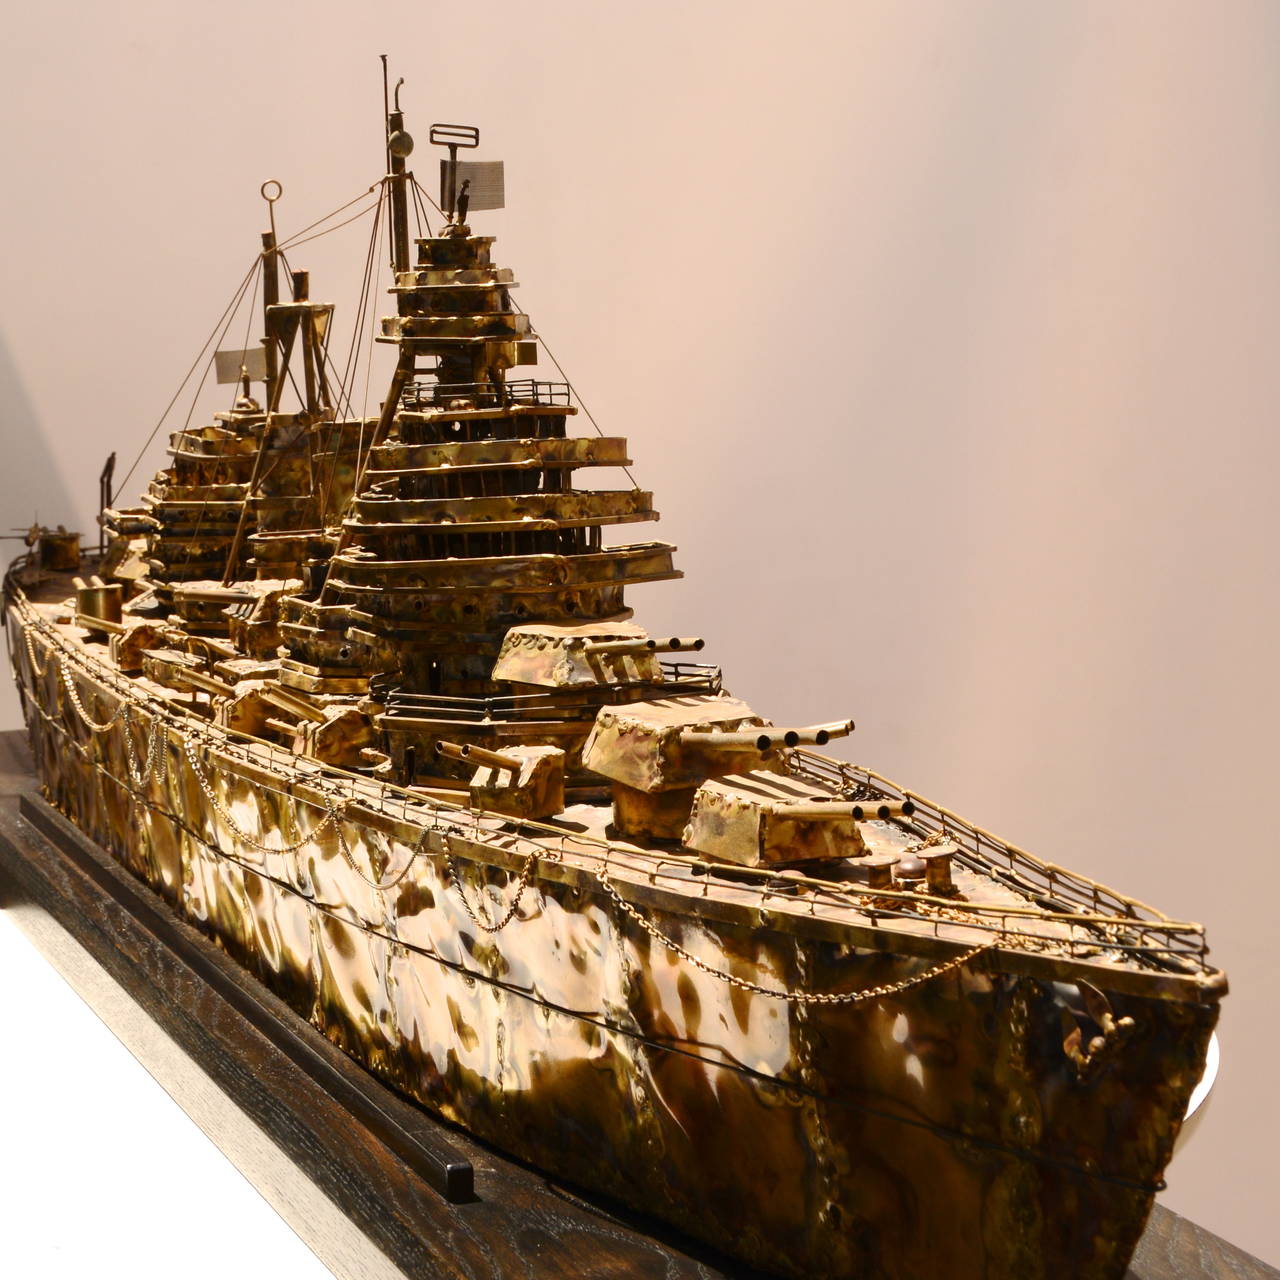 This is an amazing brass and steel battleship sculpture by Joe Venturini (1954).  This piece is considered one of his master works.